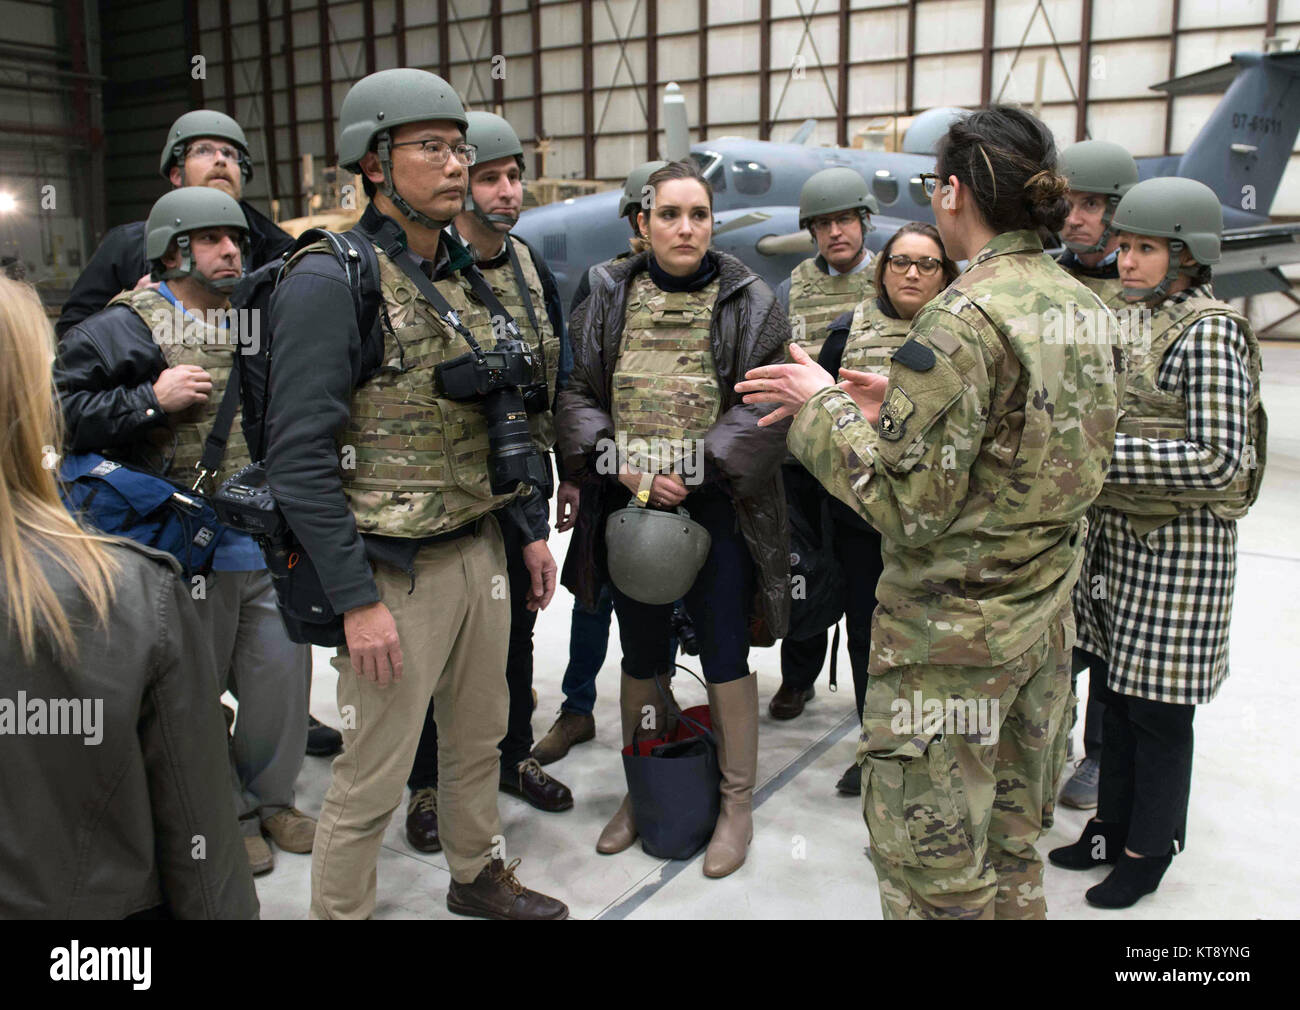 Bagram, Afghanistan. 21st Dec, 2017. Members of the media pool accompanying U.S. Vice President Mike Pence are breifed during an unannounced Christmas visit to Bagram Air Base December 21, 2017 in Bagram, Afghanistan. Credit: Planetpix/Alamy Live News Stock Photo